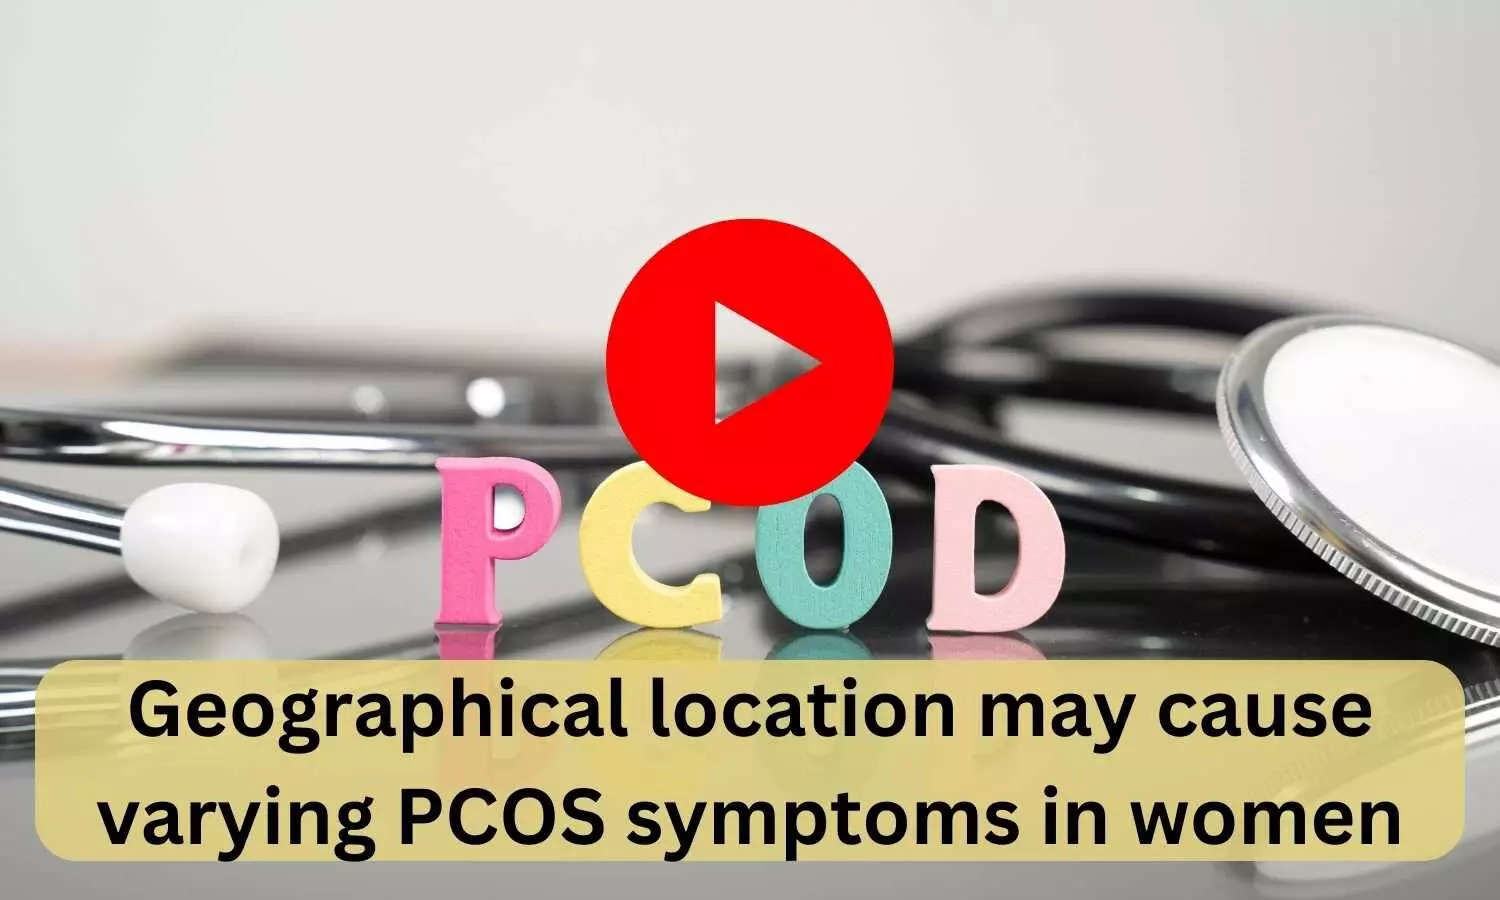 Geographical location may cause varying PCOS symptoms in women